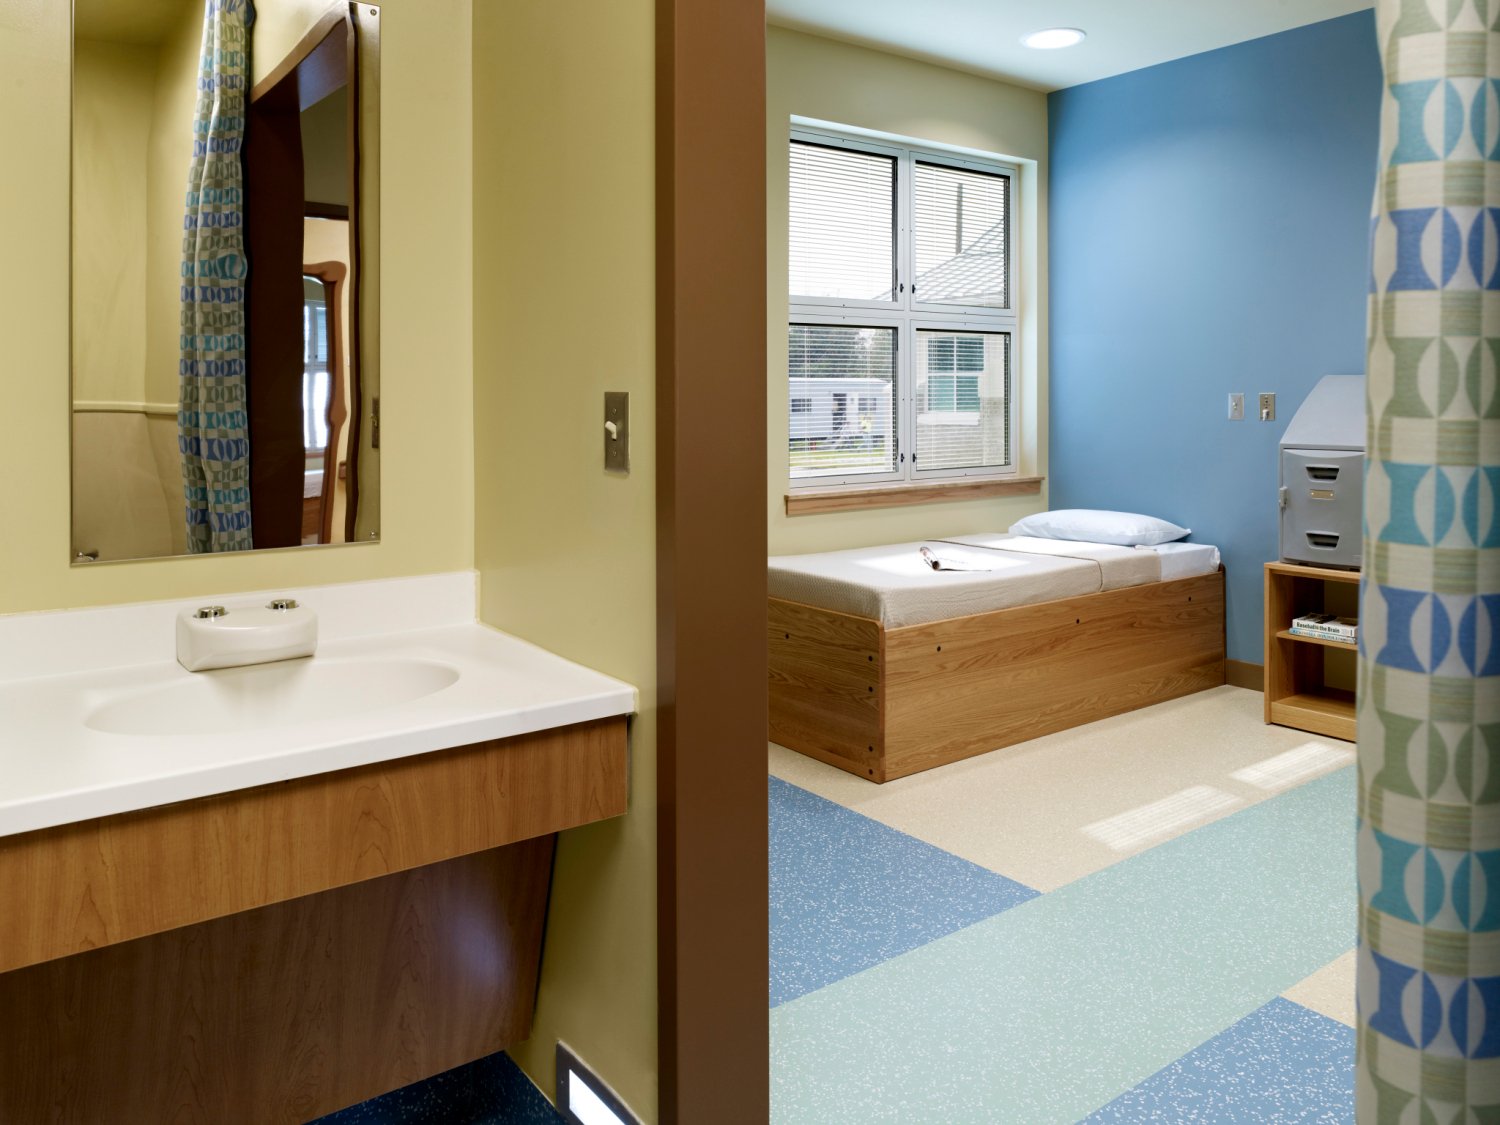 Guidelines for designing a hospital